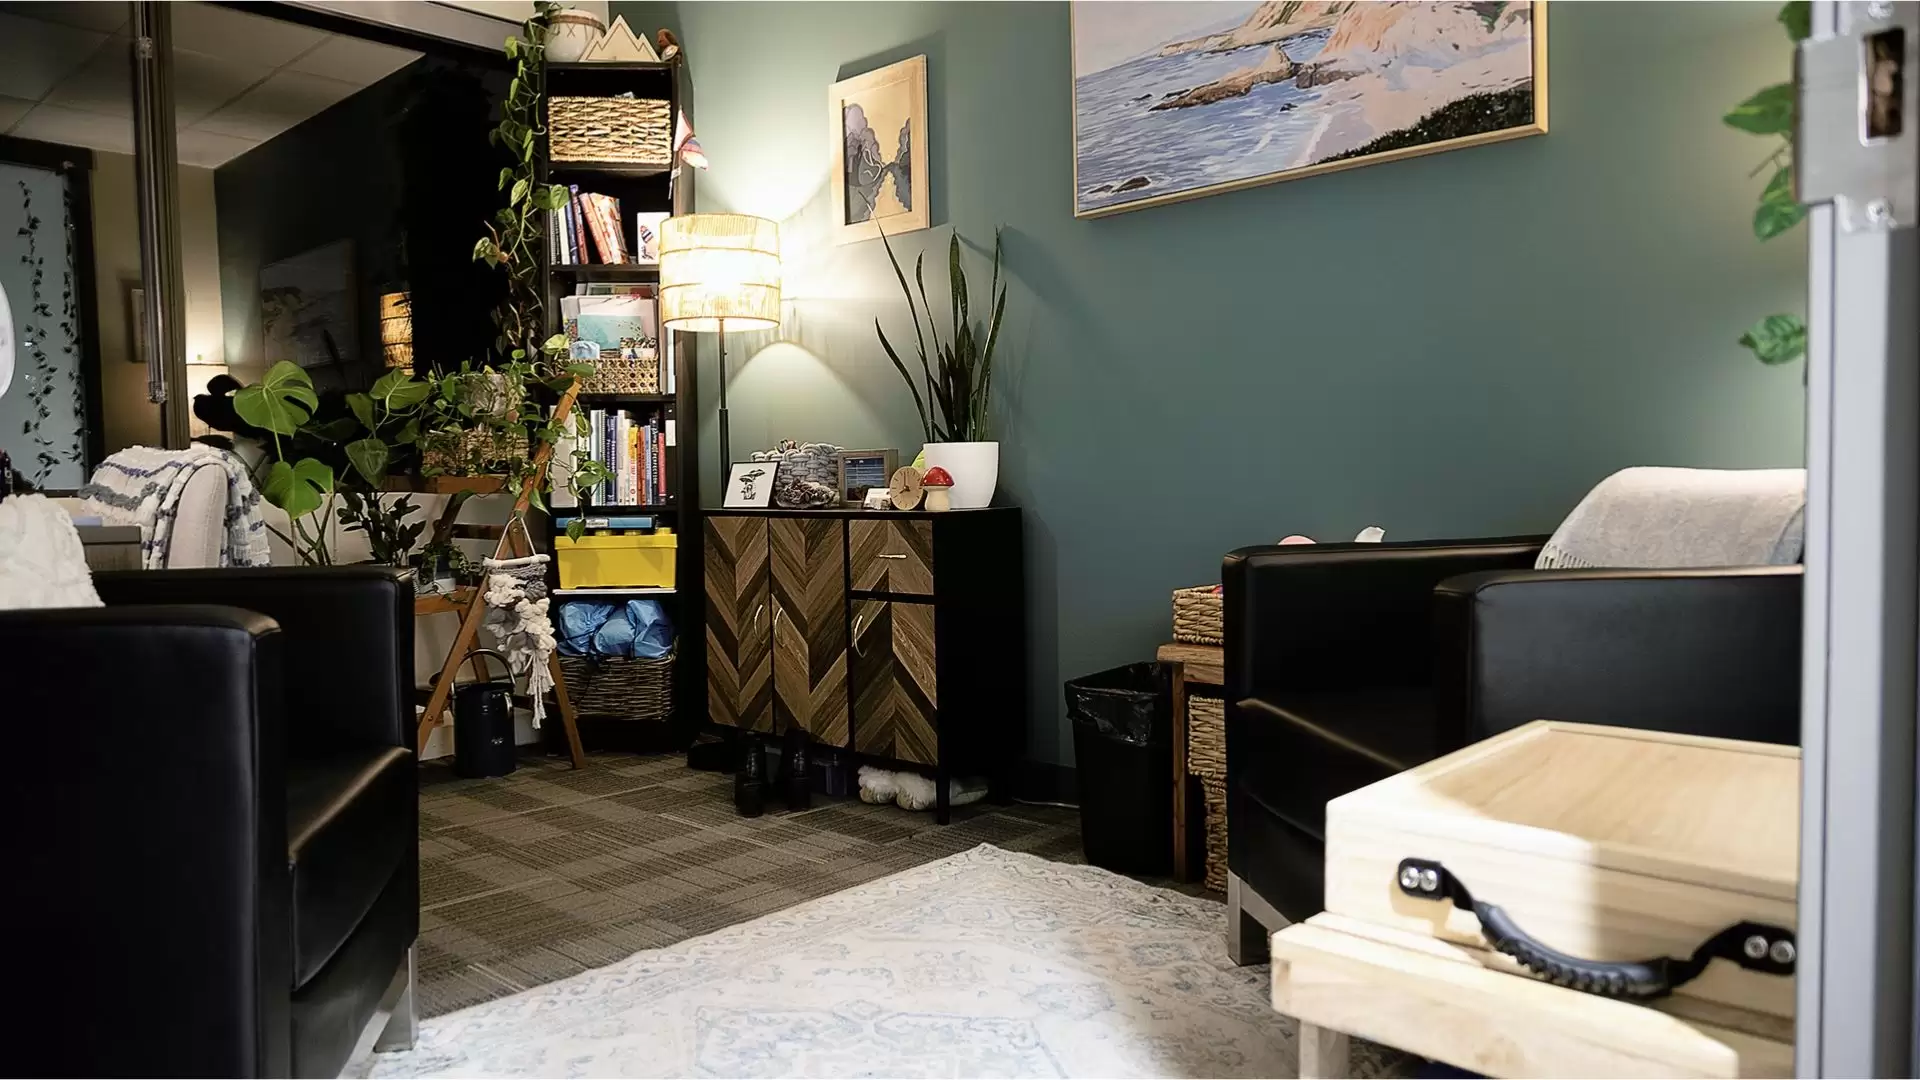 SACE adult counsellor office with two chairs, blankets, book shelf filled with books, baskets, plants, and a cabinet. There is artwork on the walls and a light coloured area rug in the middle of the floor.